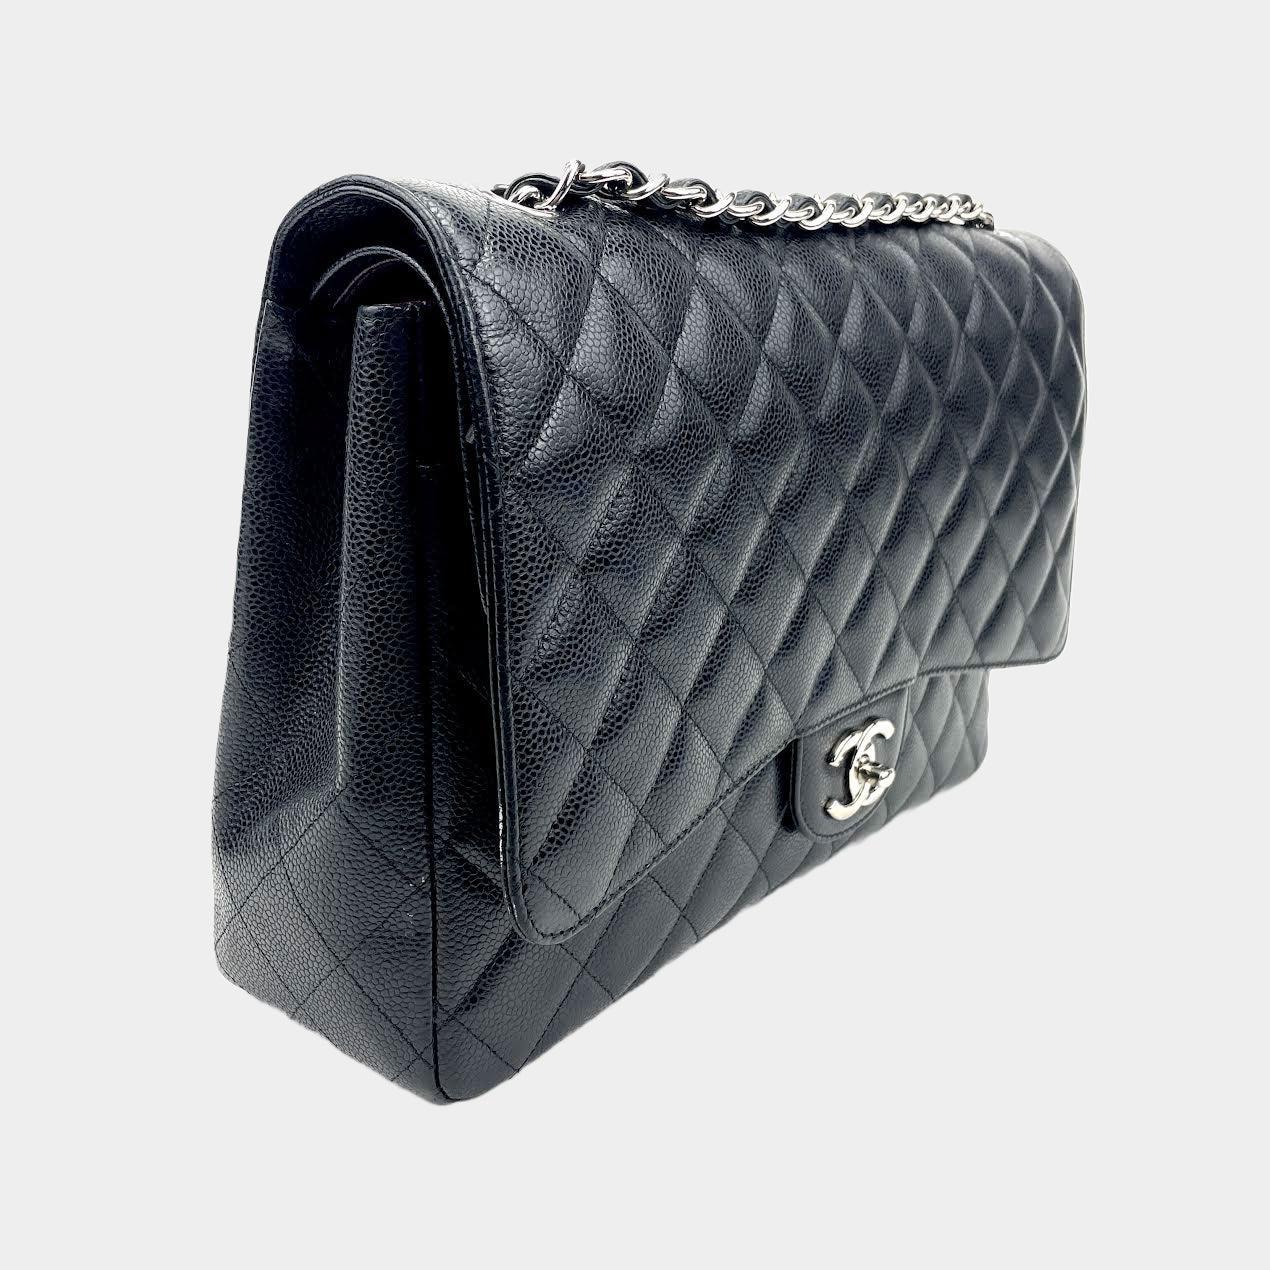 CHANEL Black Maxi Caviar  Quilted Double Flap - ALB